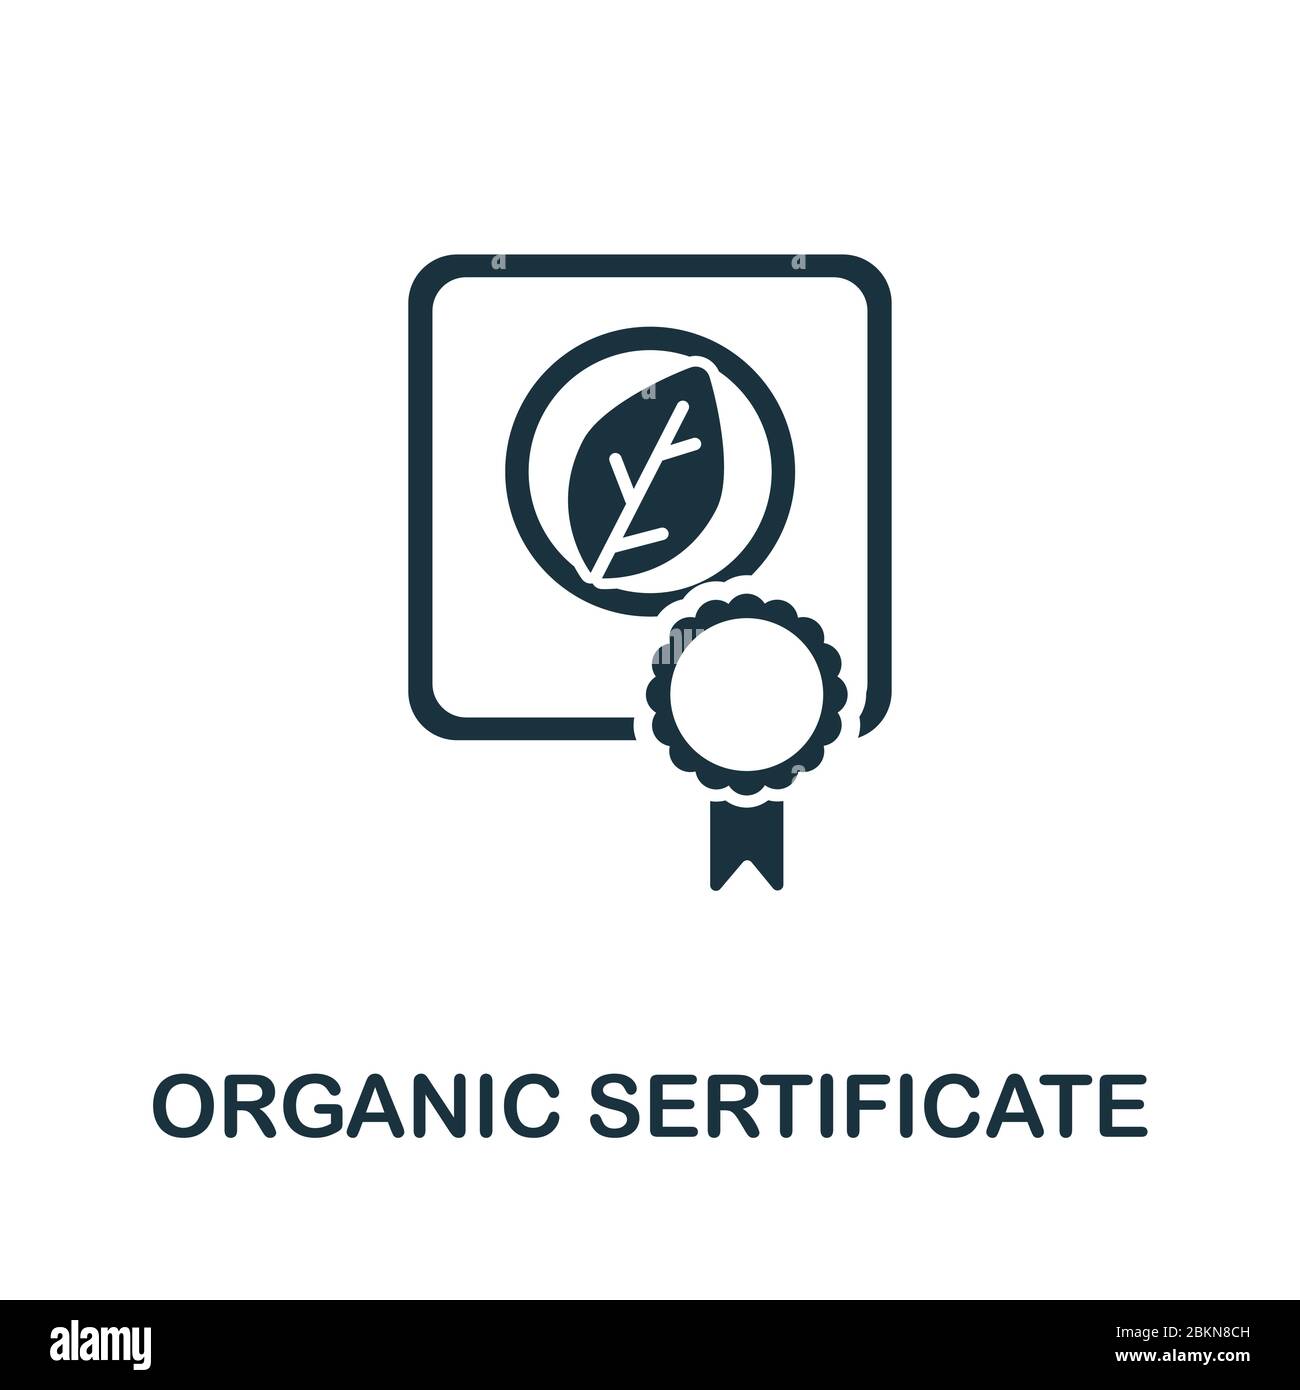 Organic Certificate icon from organic farming collection. Simple line Organic Certificate icon for templates, web design and infographics Stock Vector